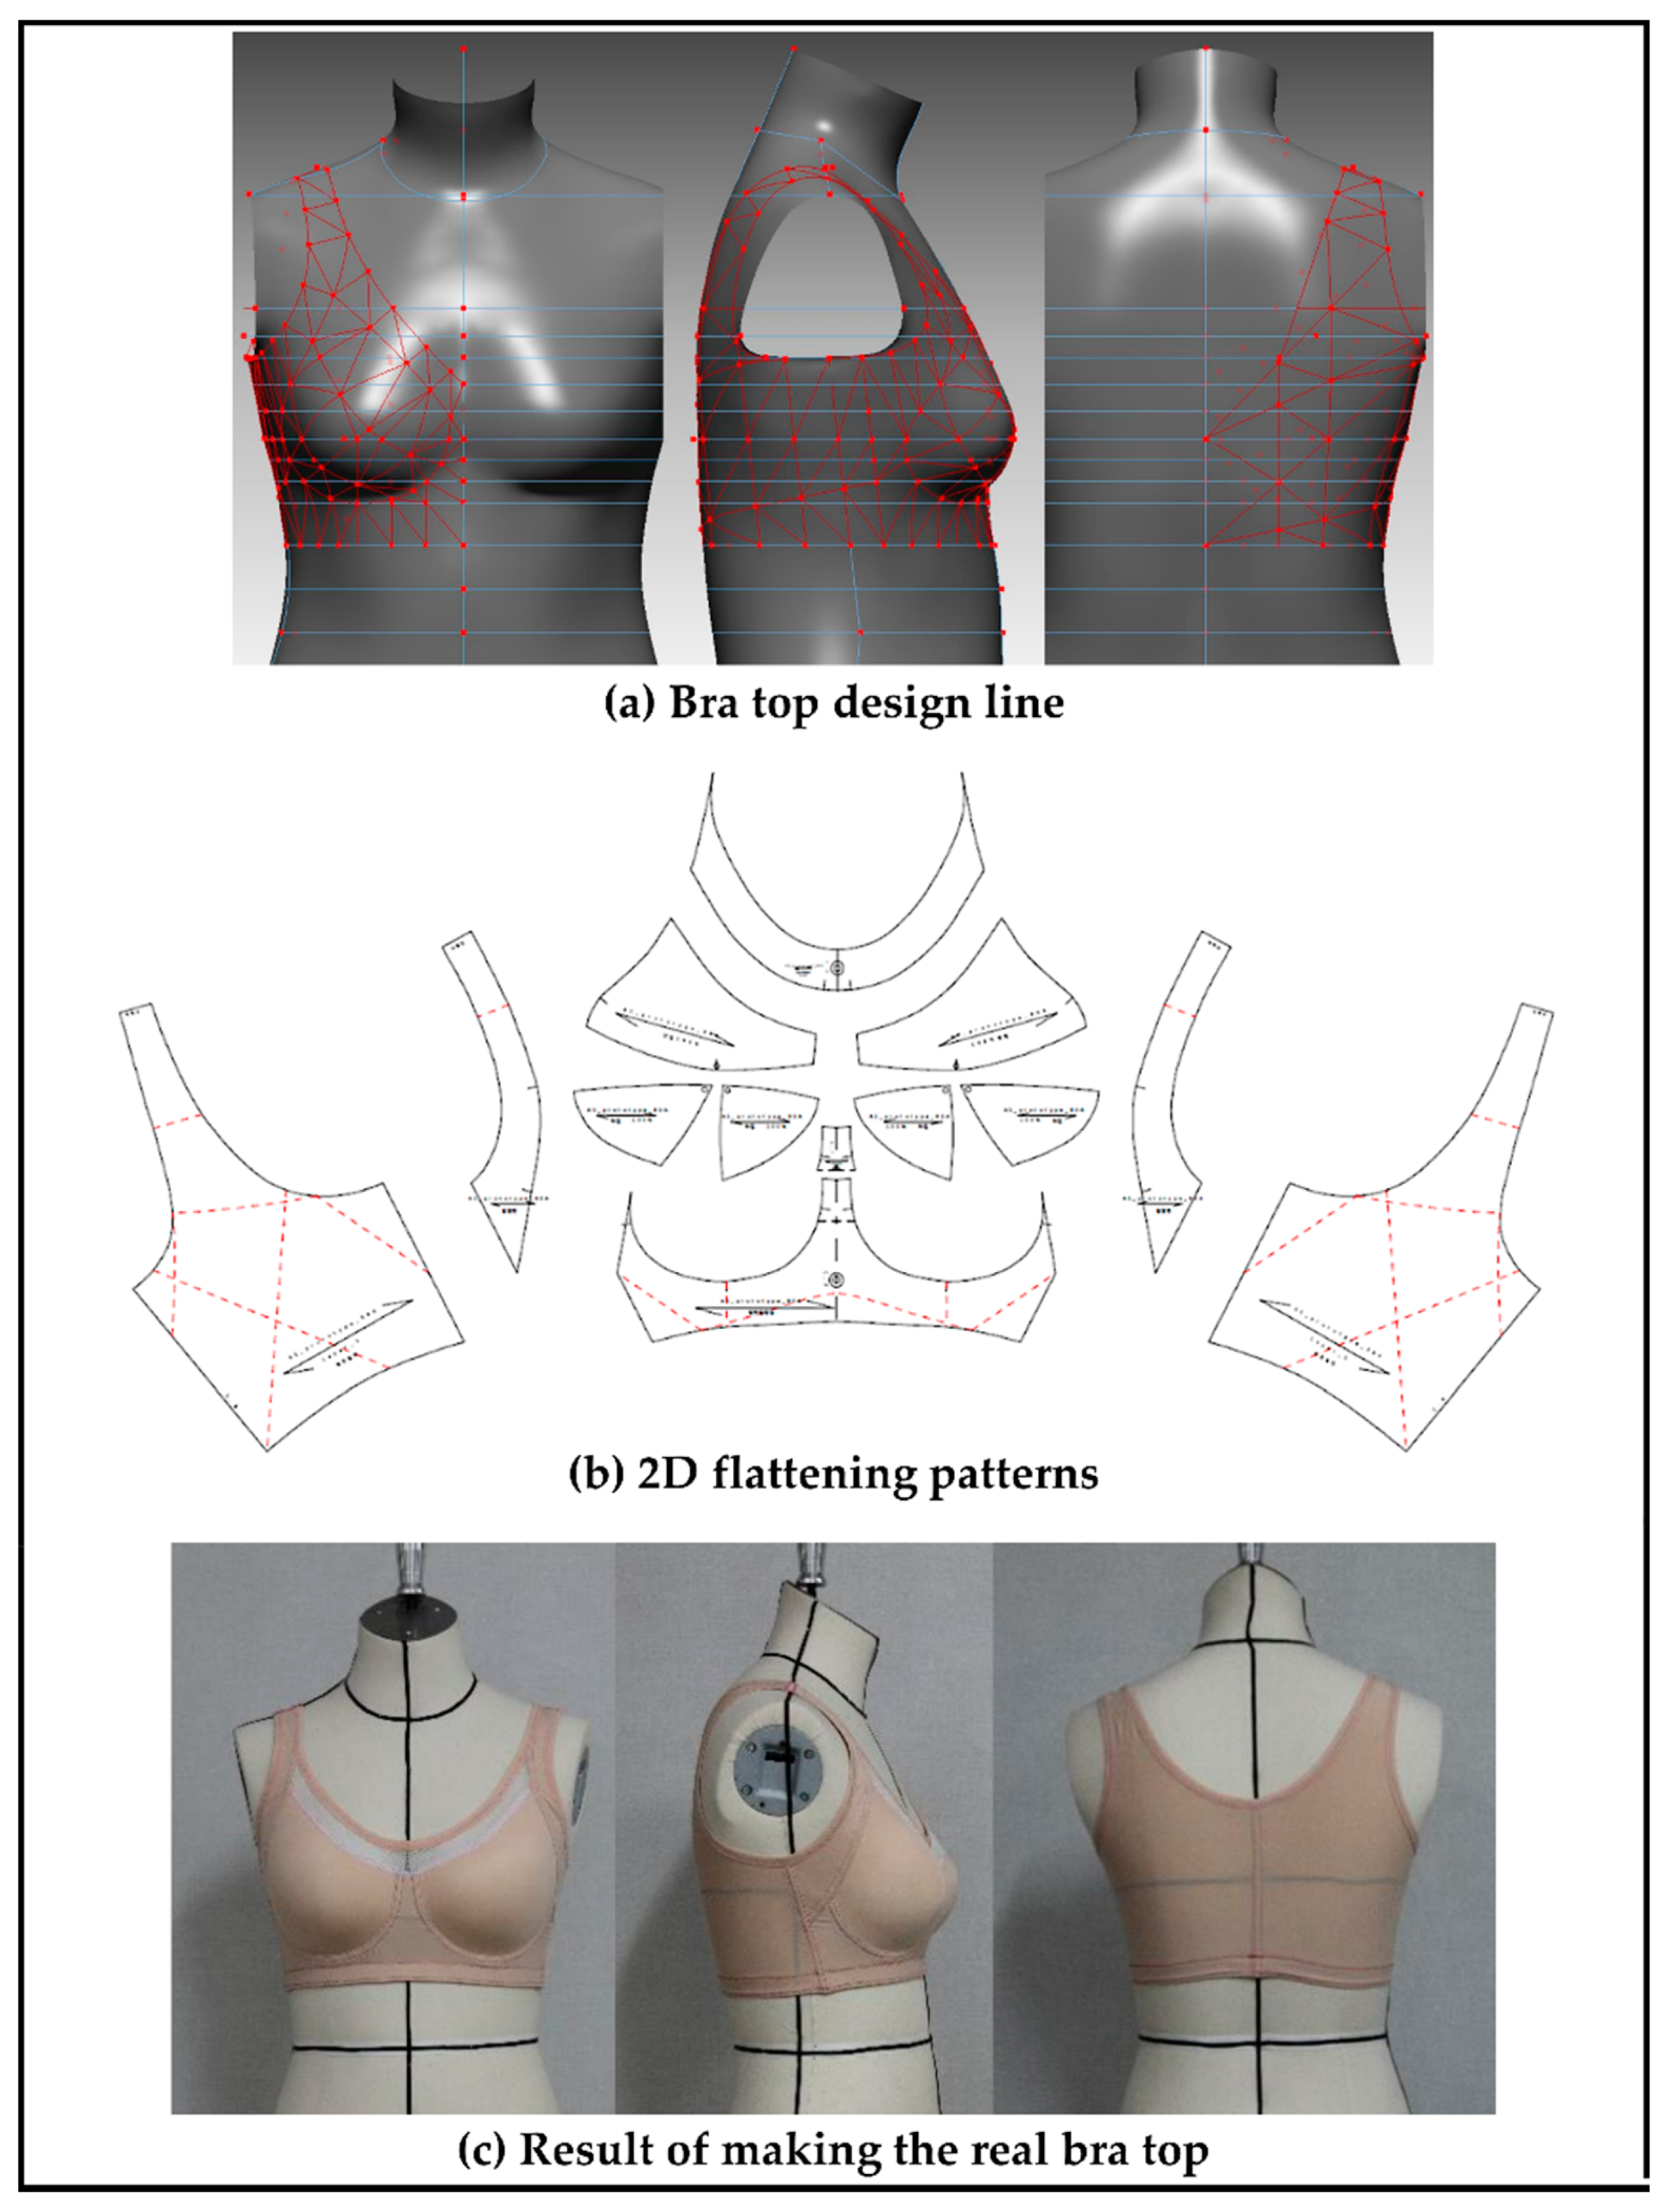 IJERPH | Free Full-Text | Digital-Based Healthy Bra Top Design That  Promotes the Physical Activity of New Senior Women by Applying an Optimal  Pressure | HTML